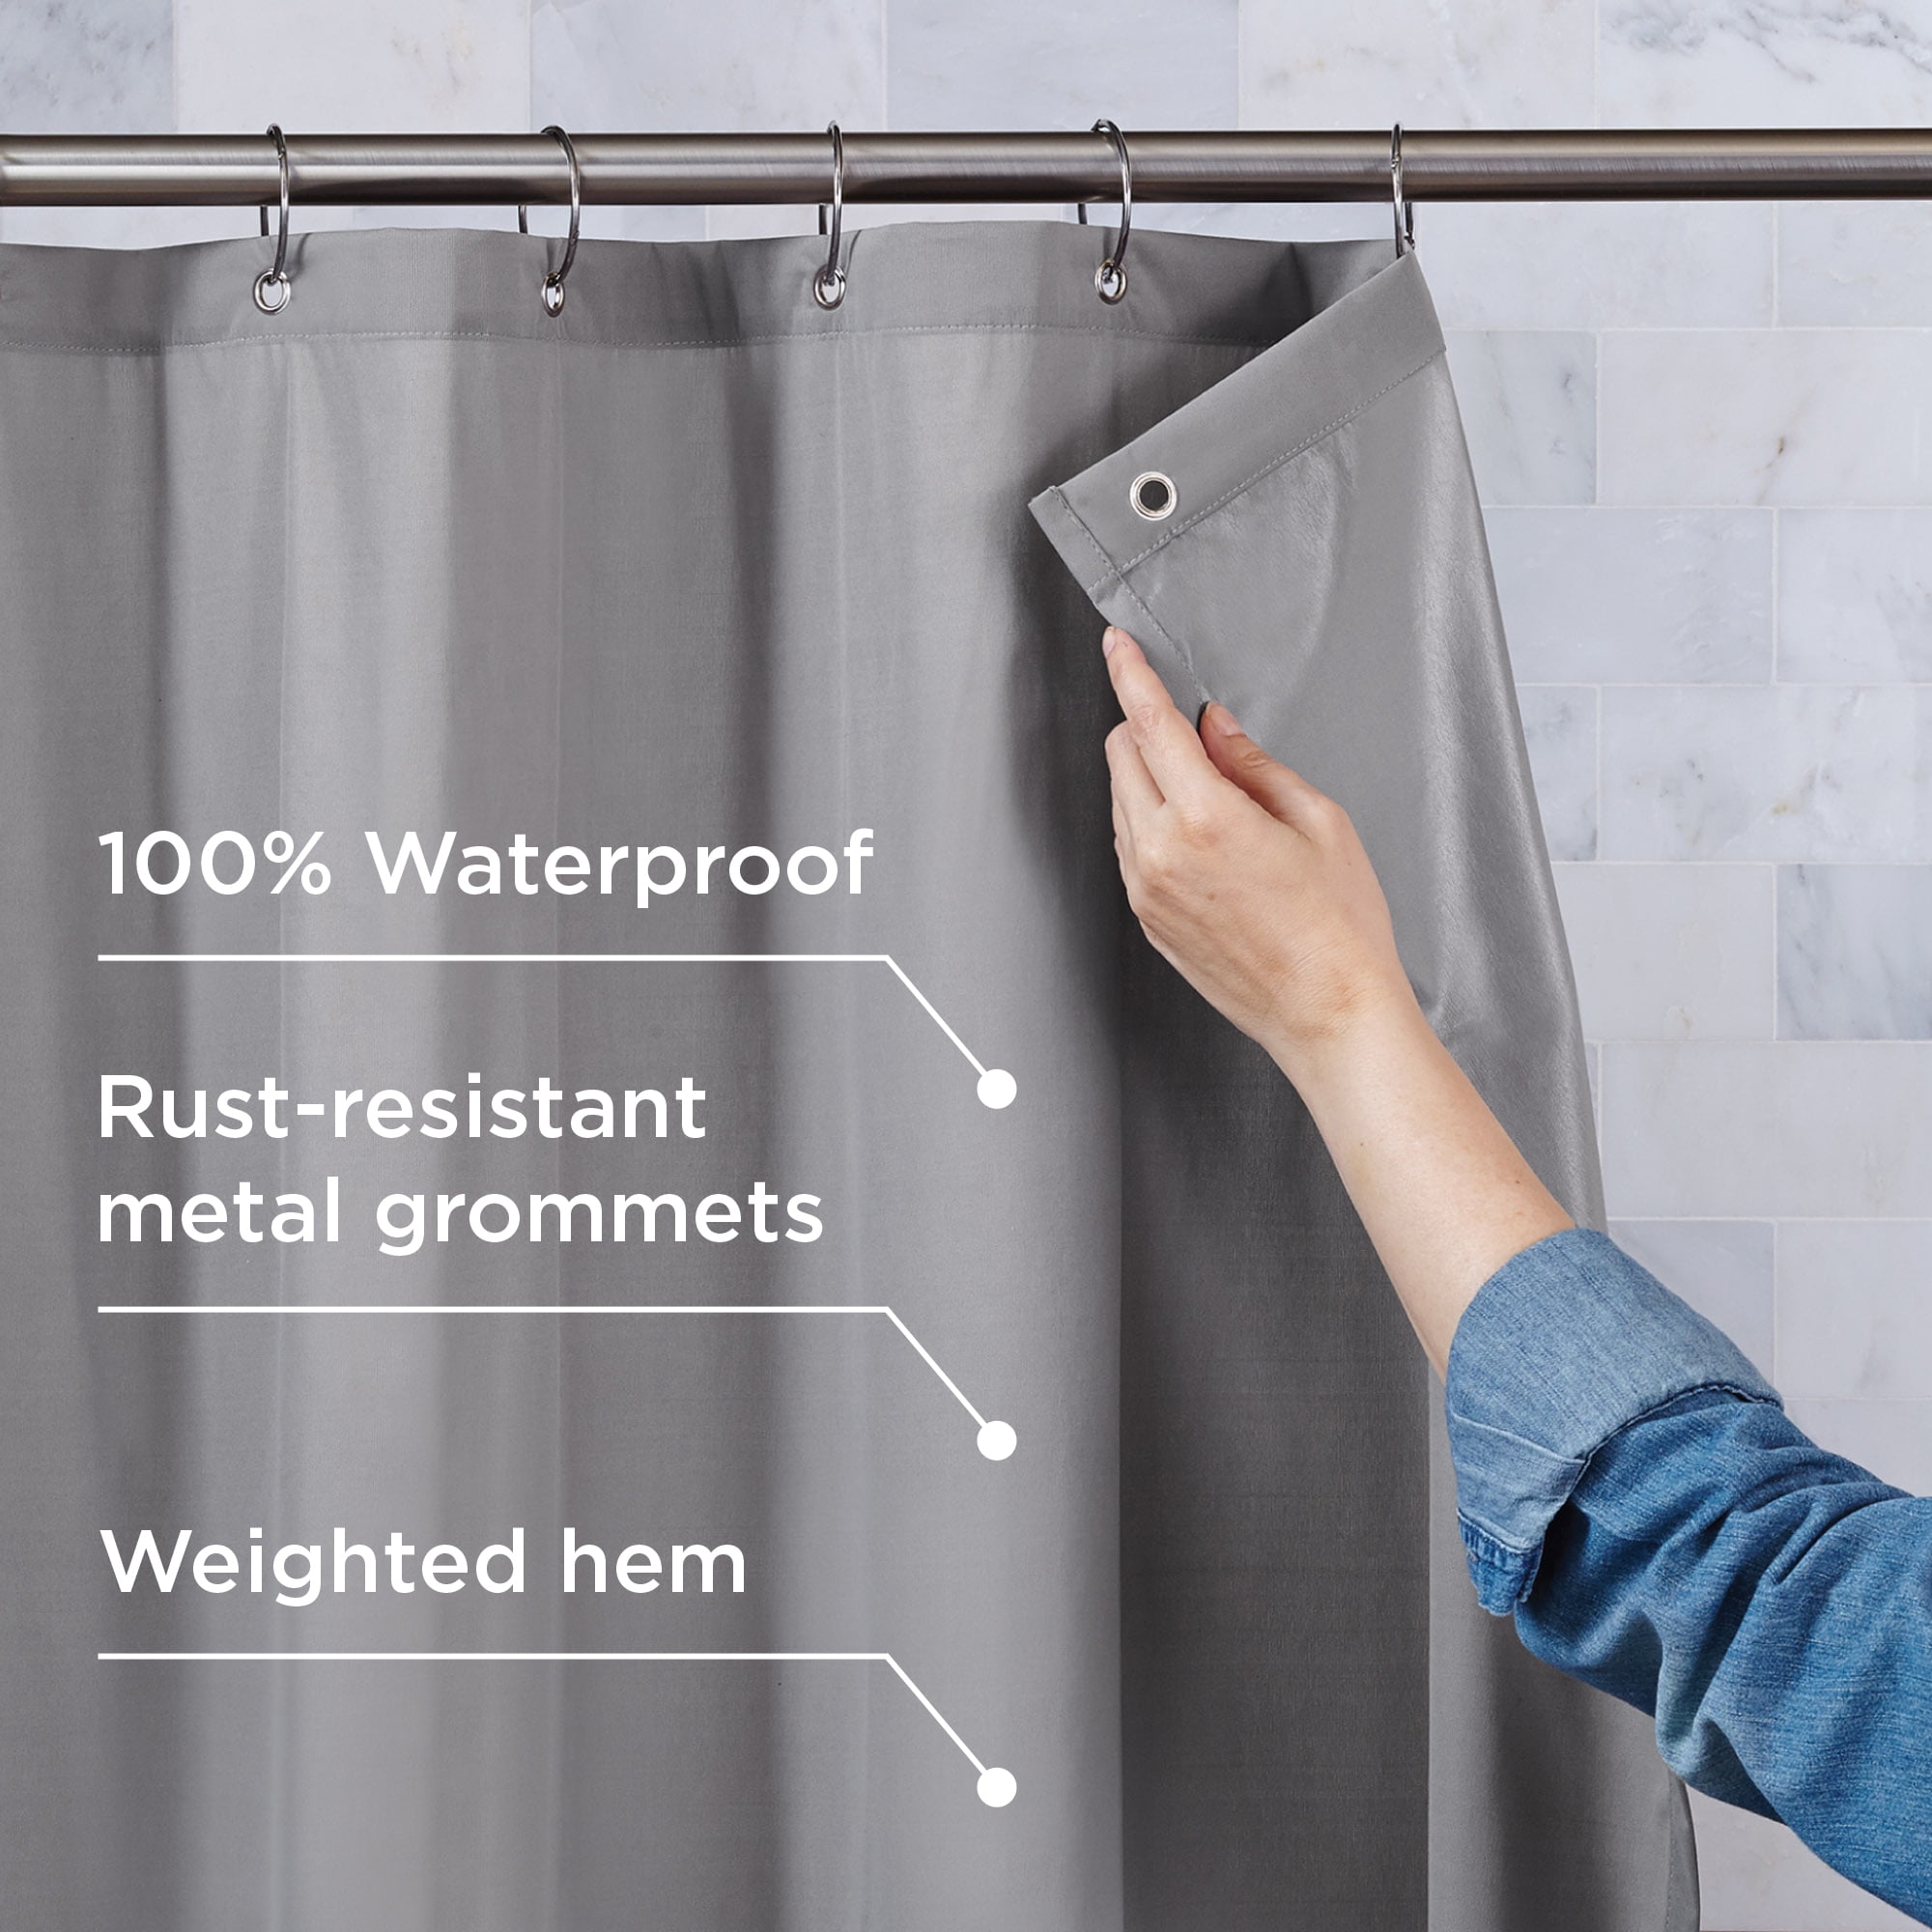 Waterproof Fabric Shower Curtain Or, Can You Use Fabric Shower Curtain Without Liner